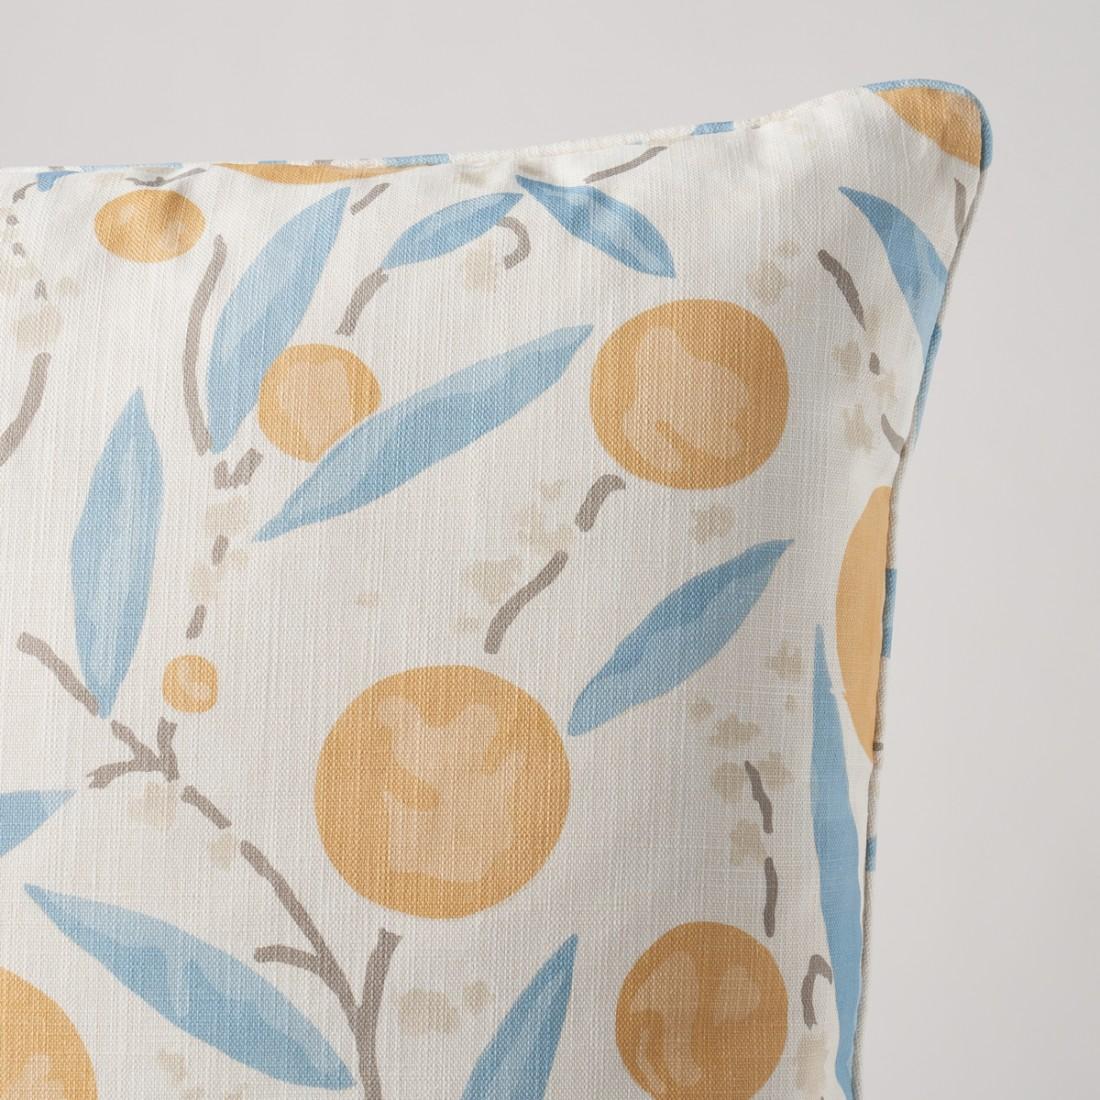 This pillow features Mirabelle with a self welt finish. Contemporary and fresh, Mirabelle in cherry-and-blush is based on a delightful 1920s pattern of cheerful lollipop flowers and stylized leaves suffused with a painterly warmth. Its cotton-linen